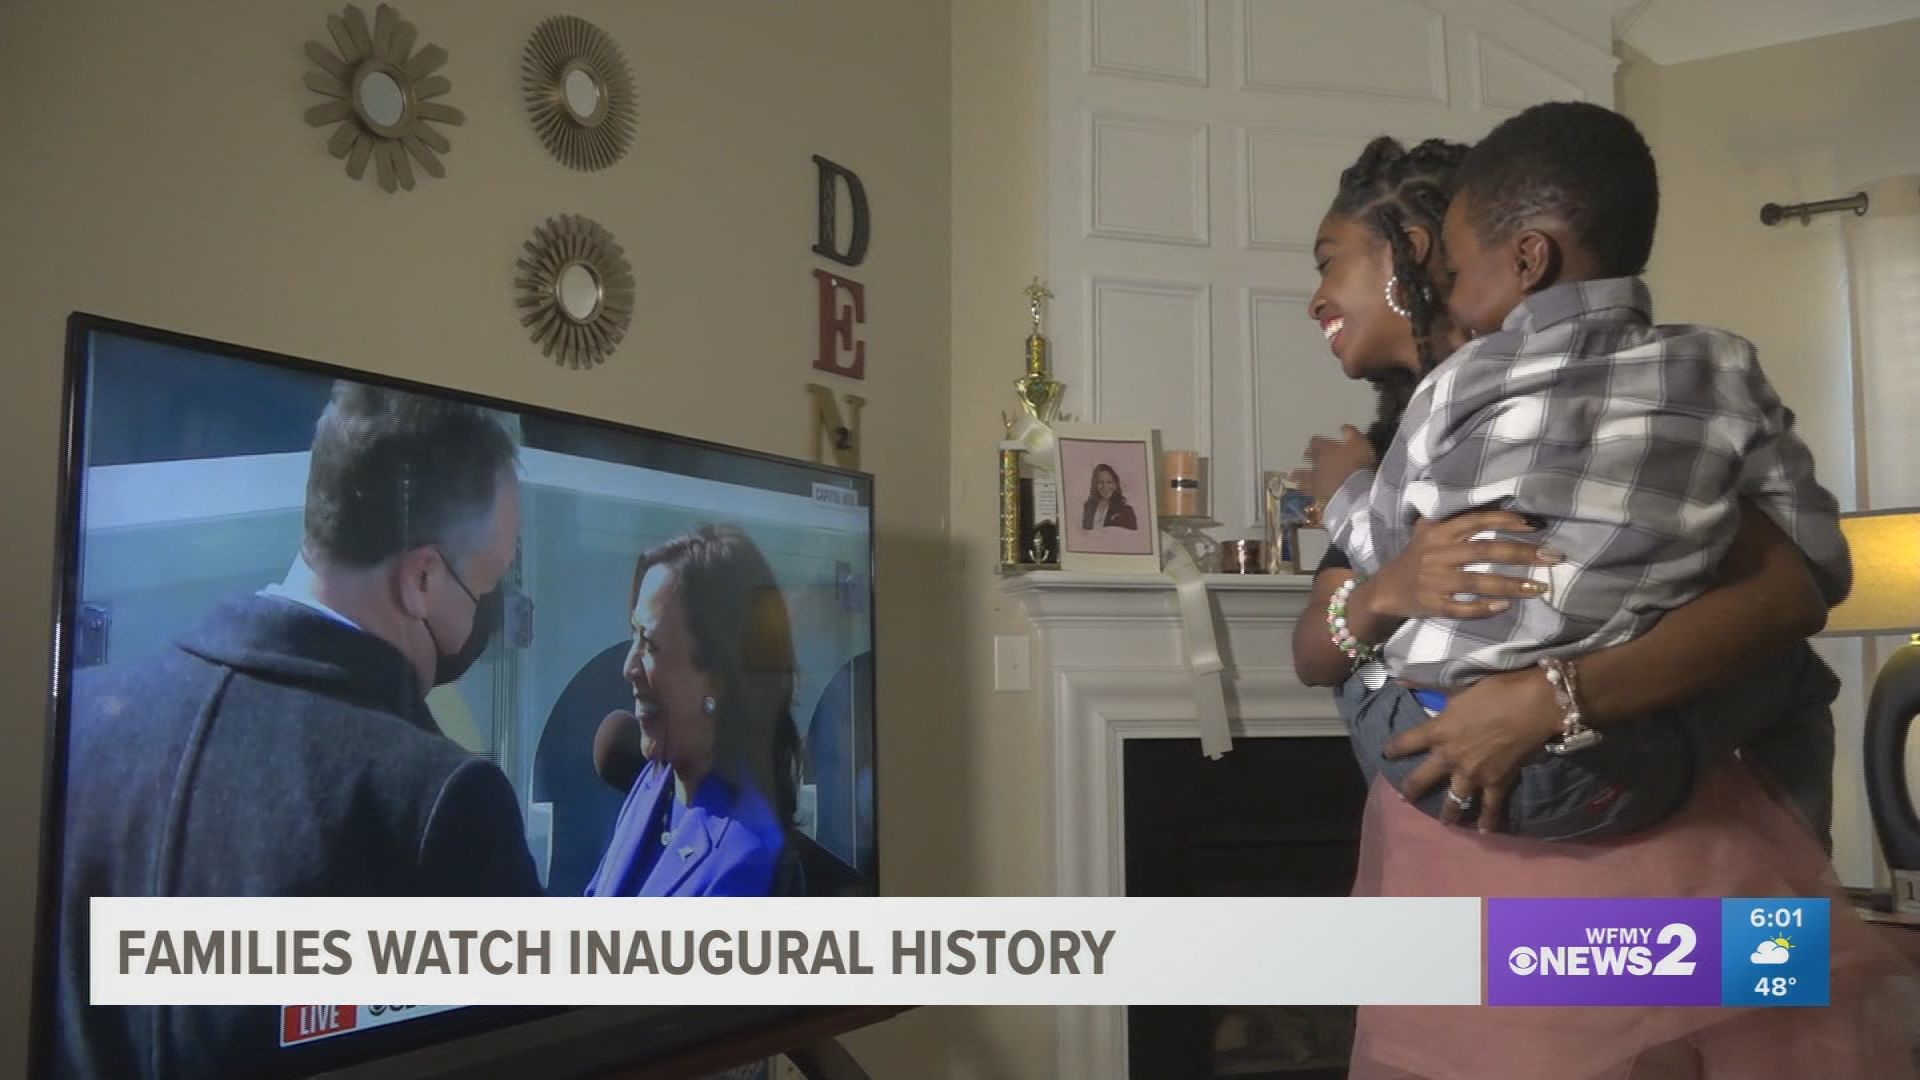 Families across the Triad watched the historic inauguration of Kamala Harris with pride and lessons for kids.